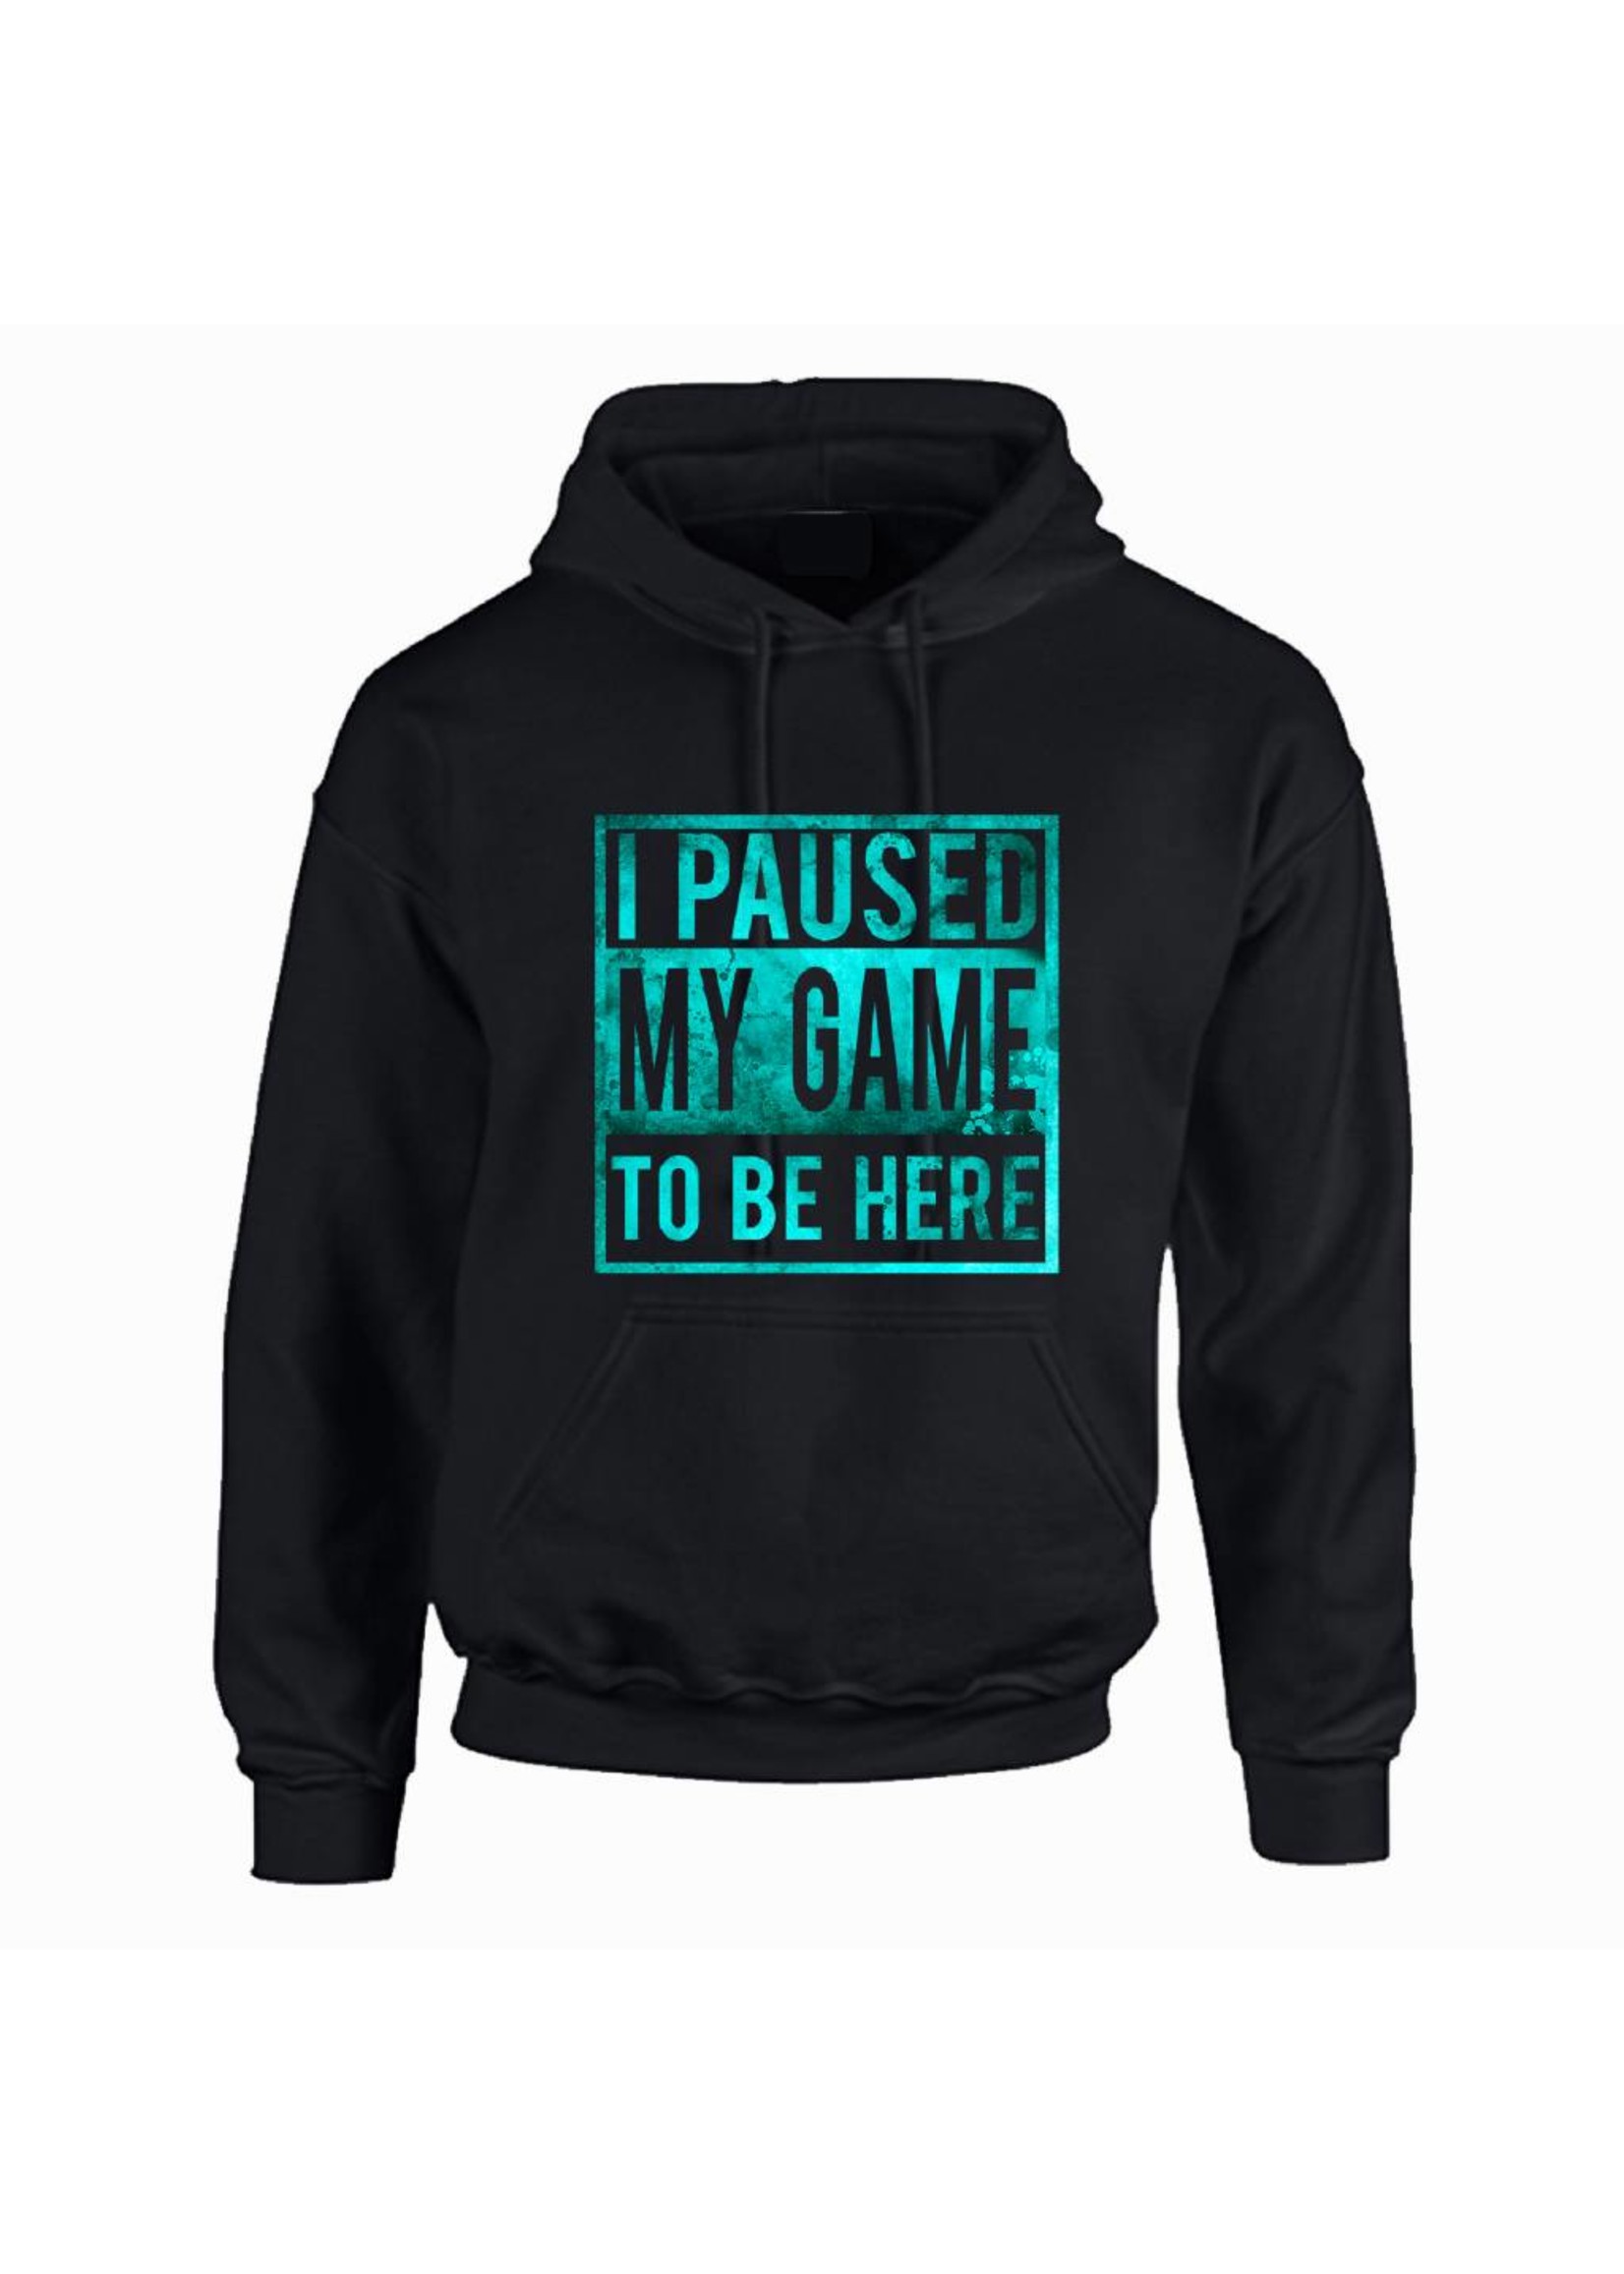 I paused my game to be here hoodie